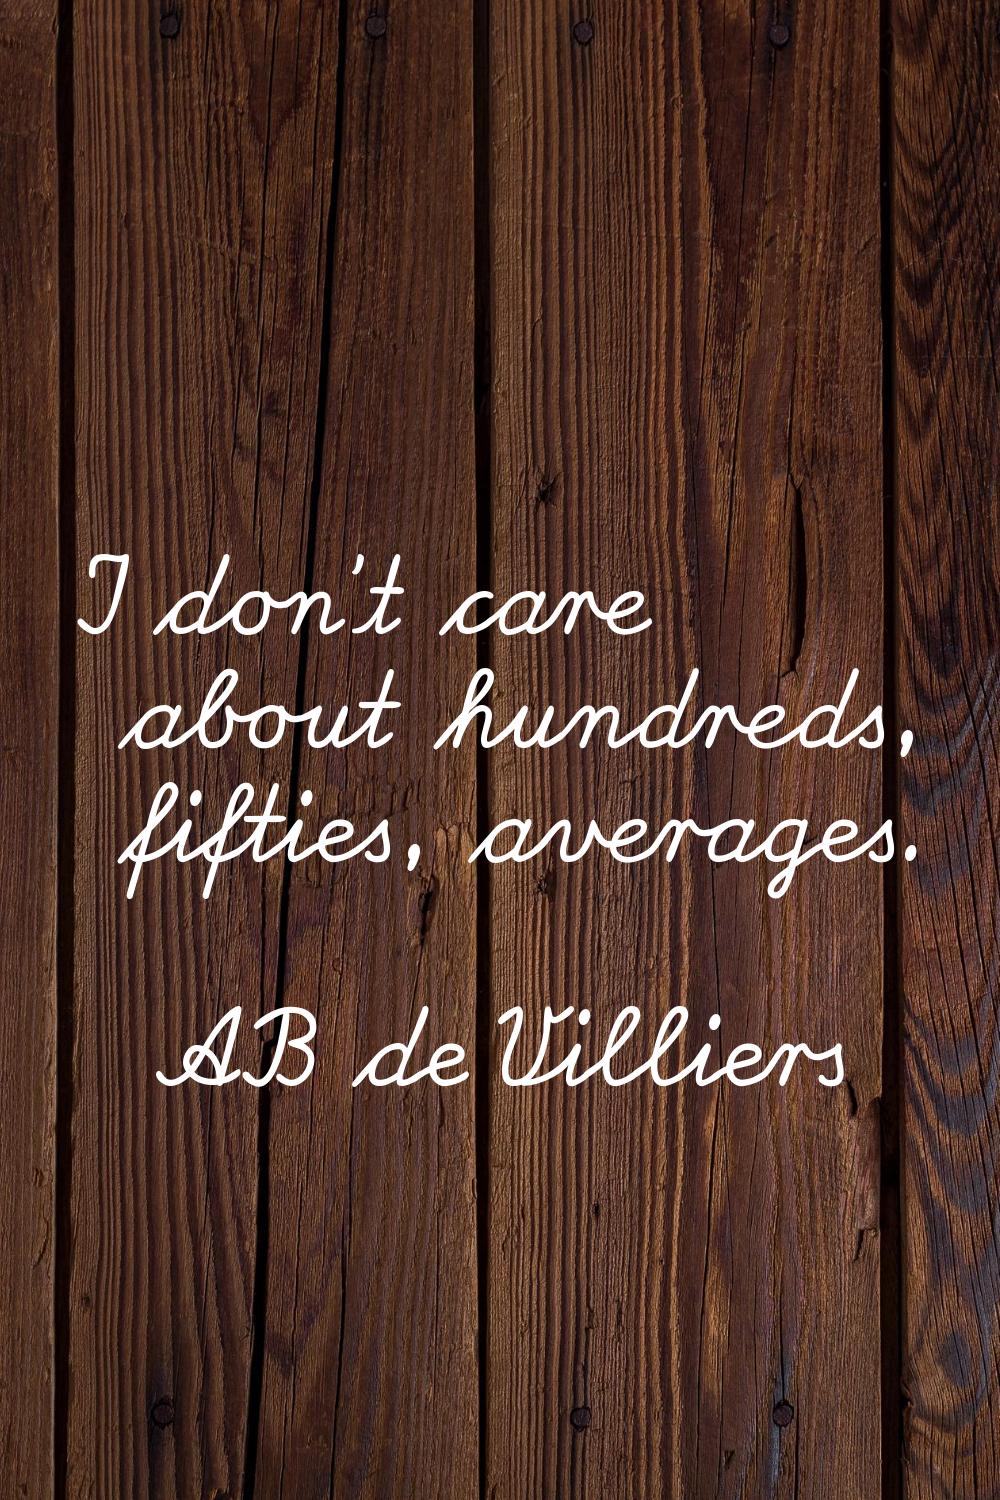 I don't care about hundreds, fifties, averages.